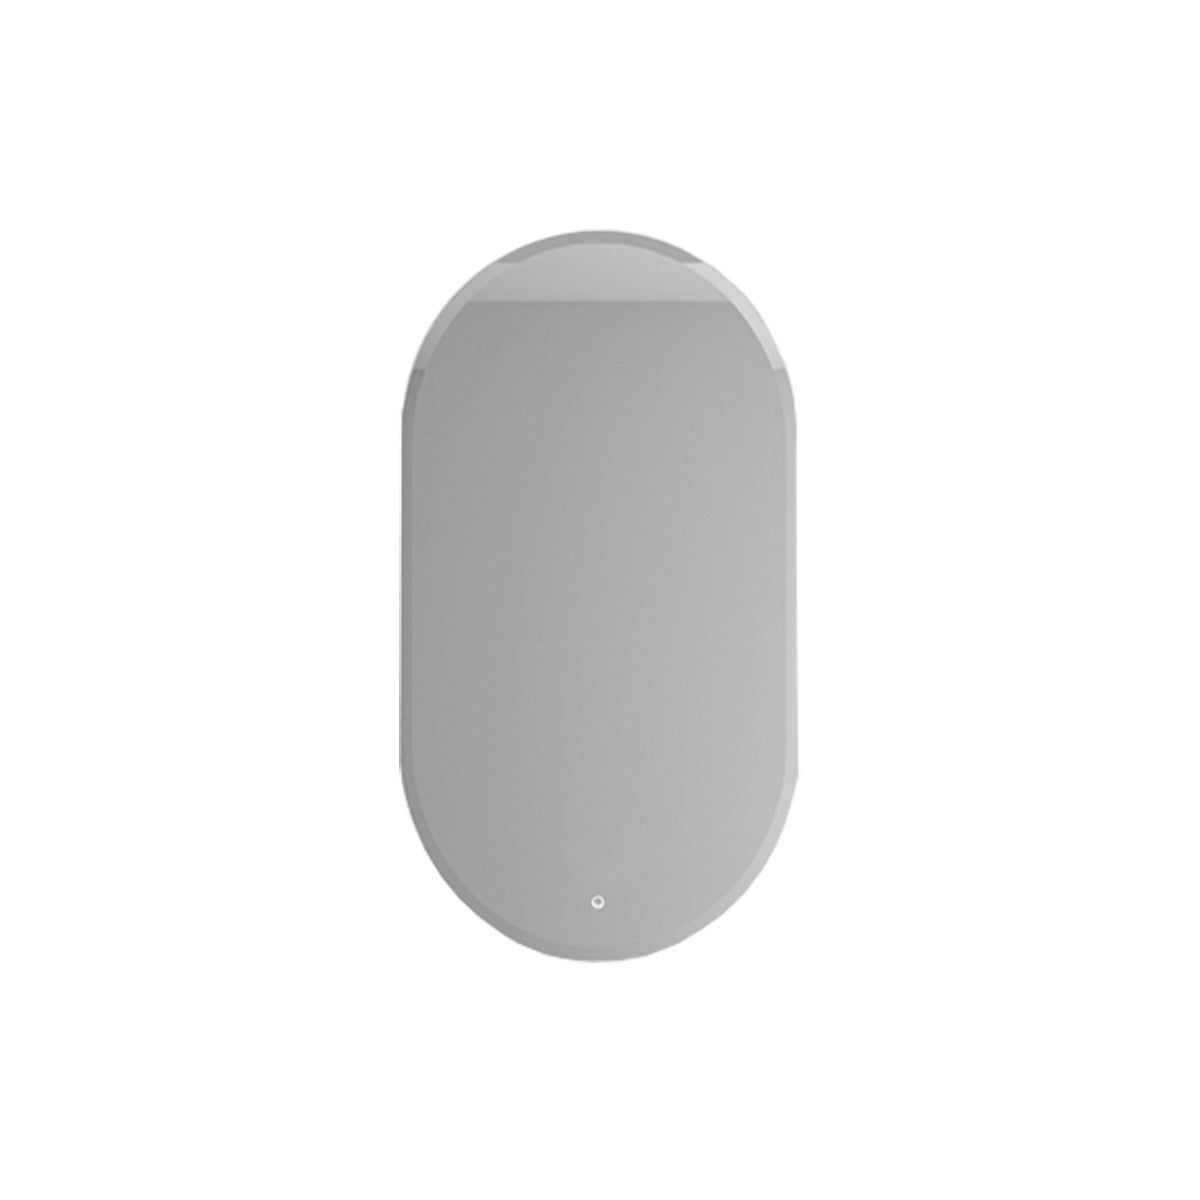 BH Premium Mirror Oval Perimeter LED with Touch Switch